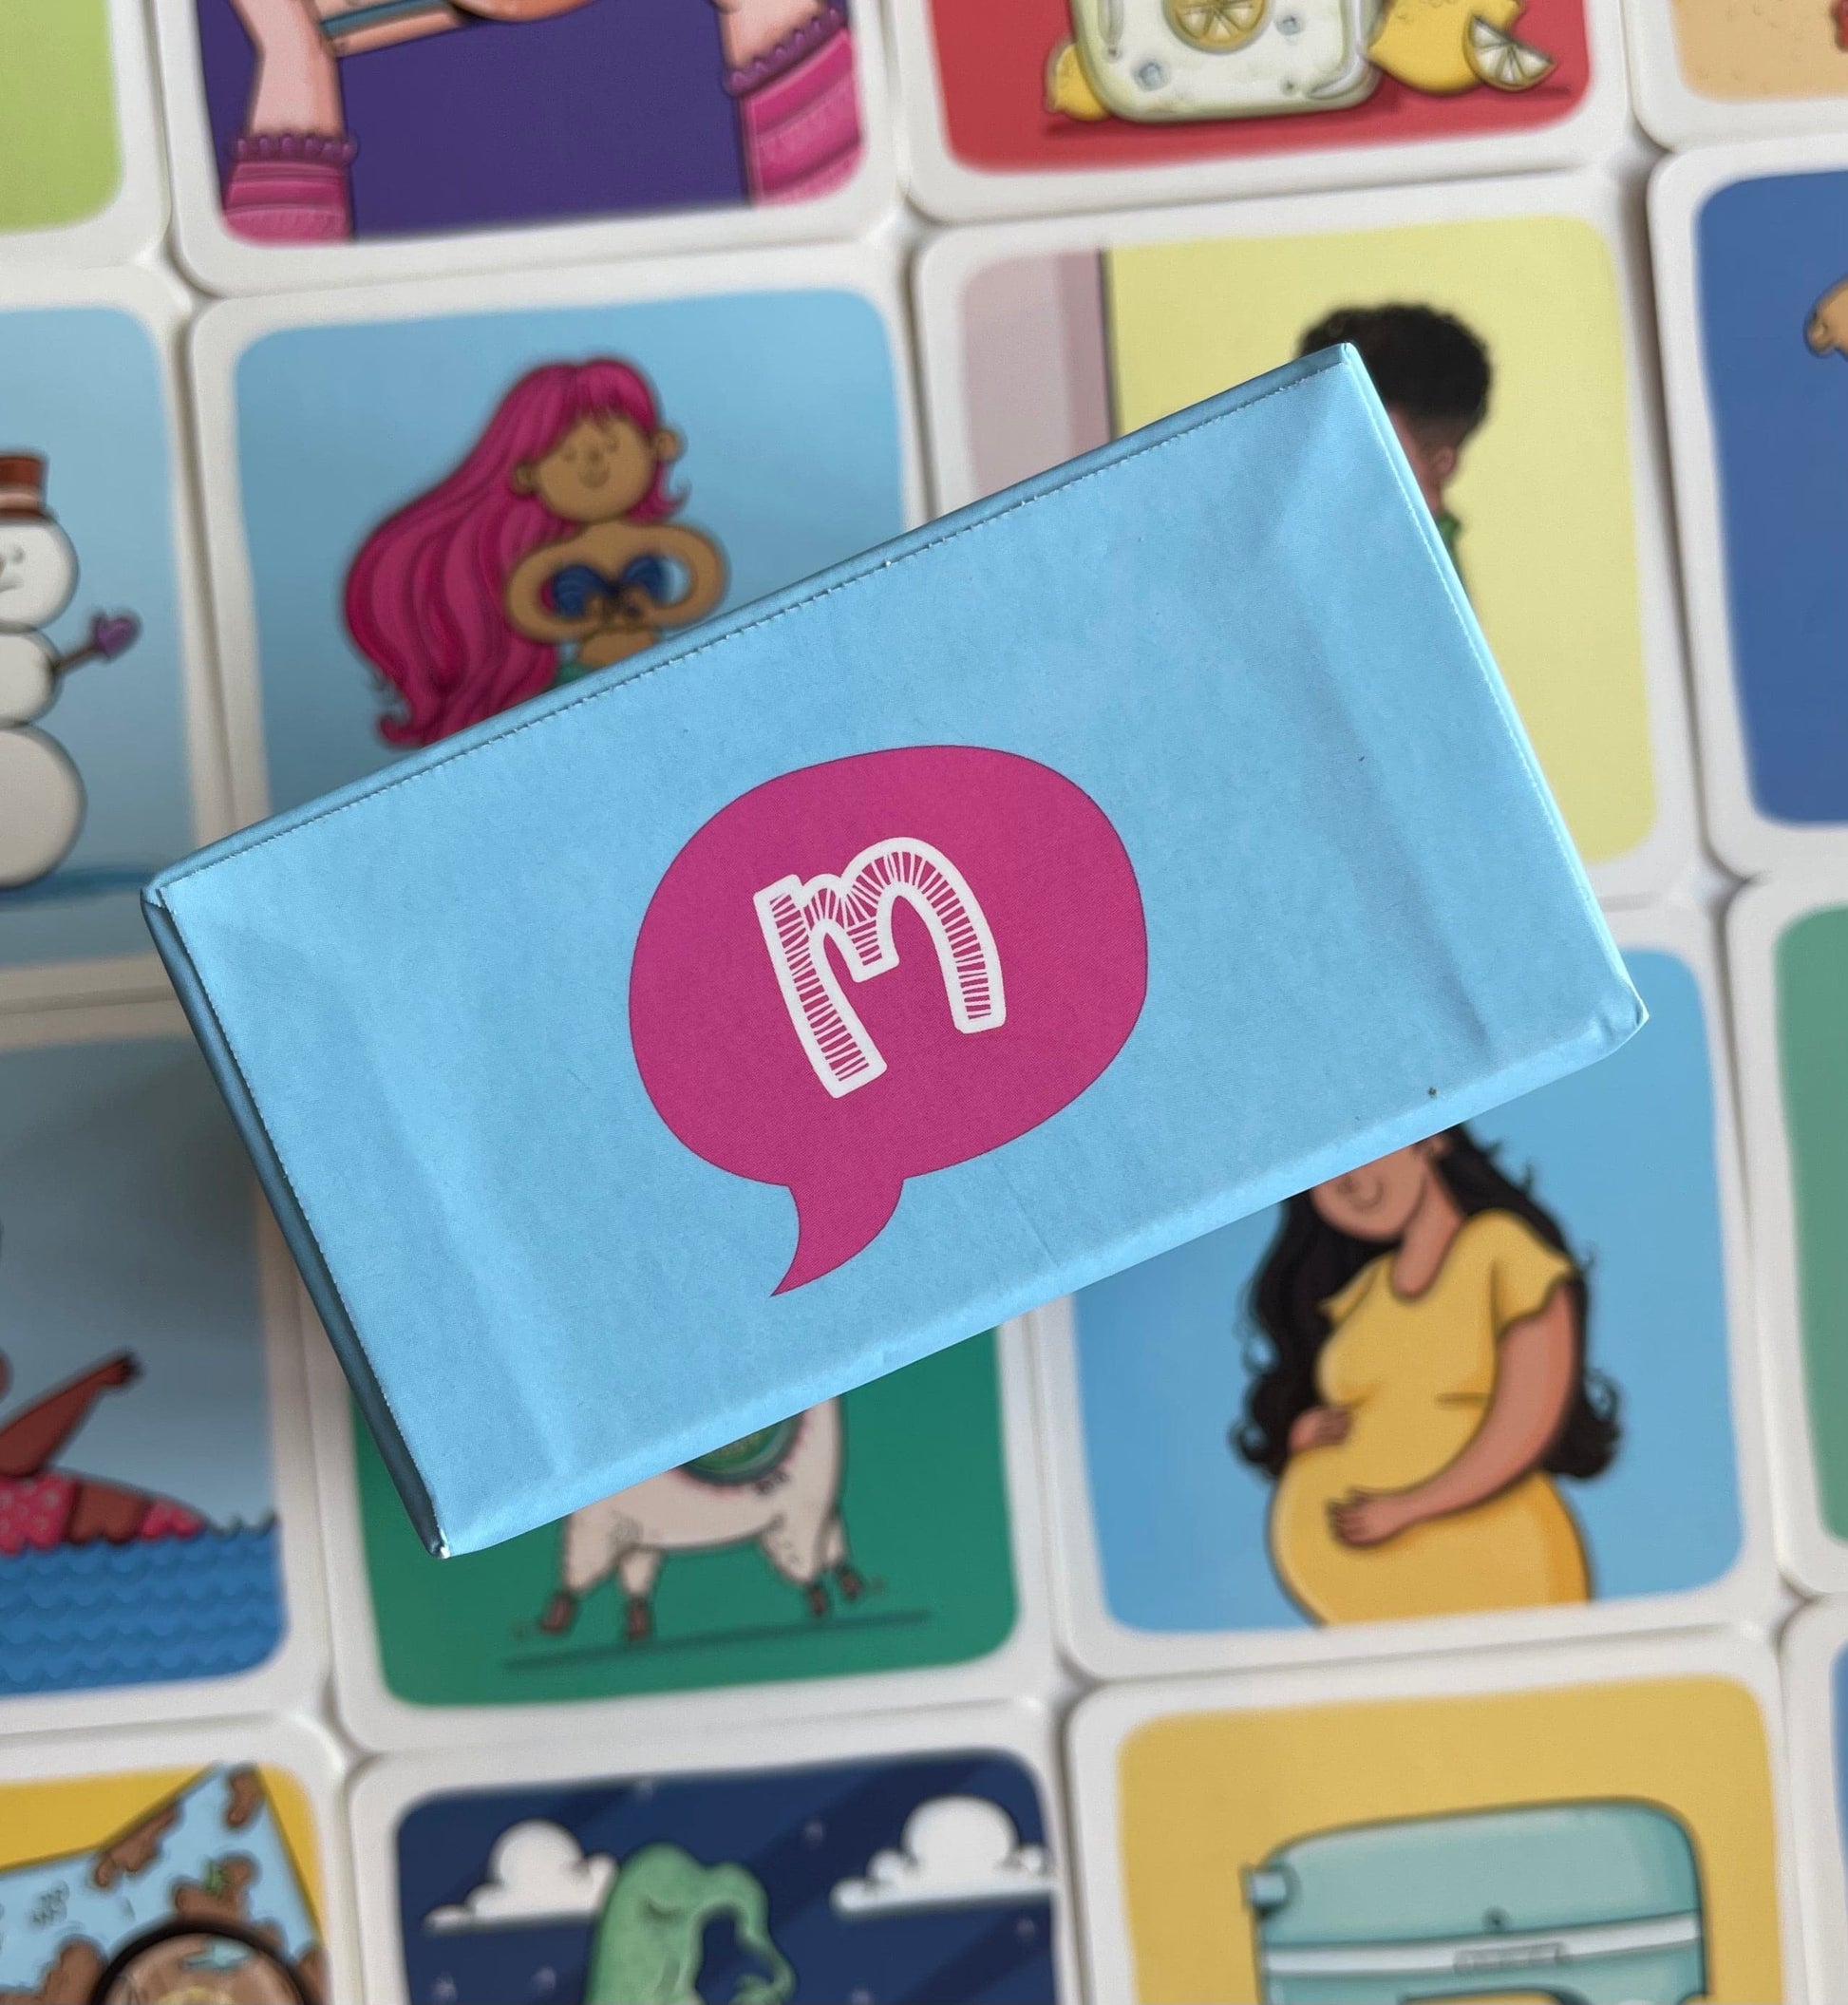 [title]Box of M - Speech Therapy Picture Cards